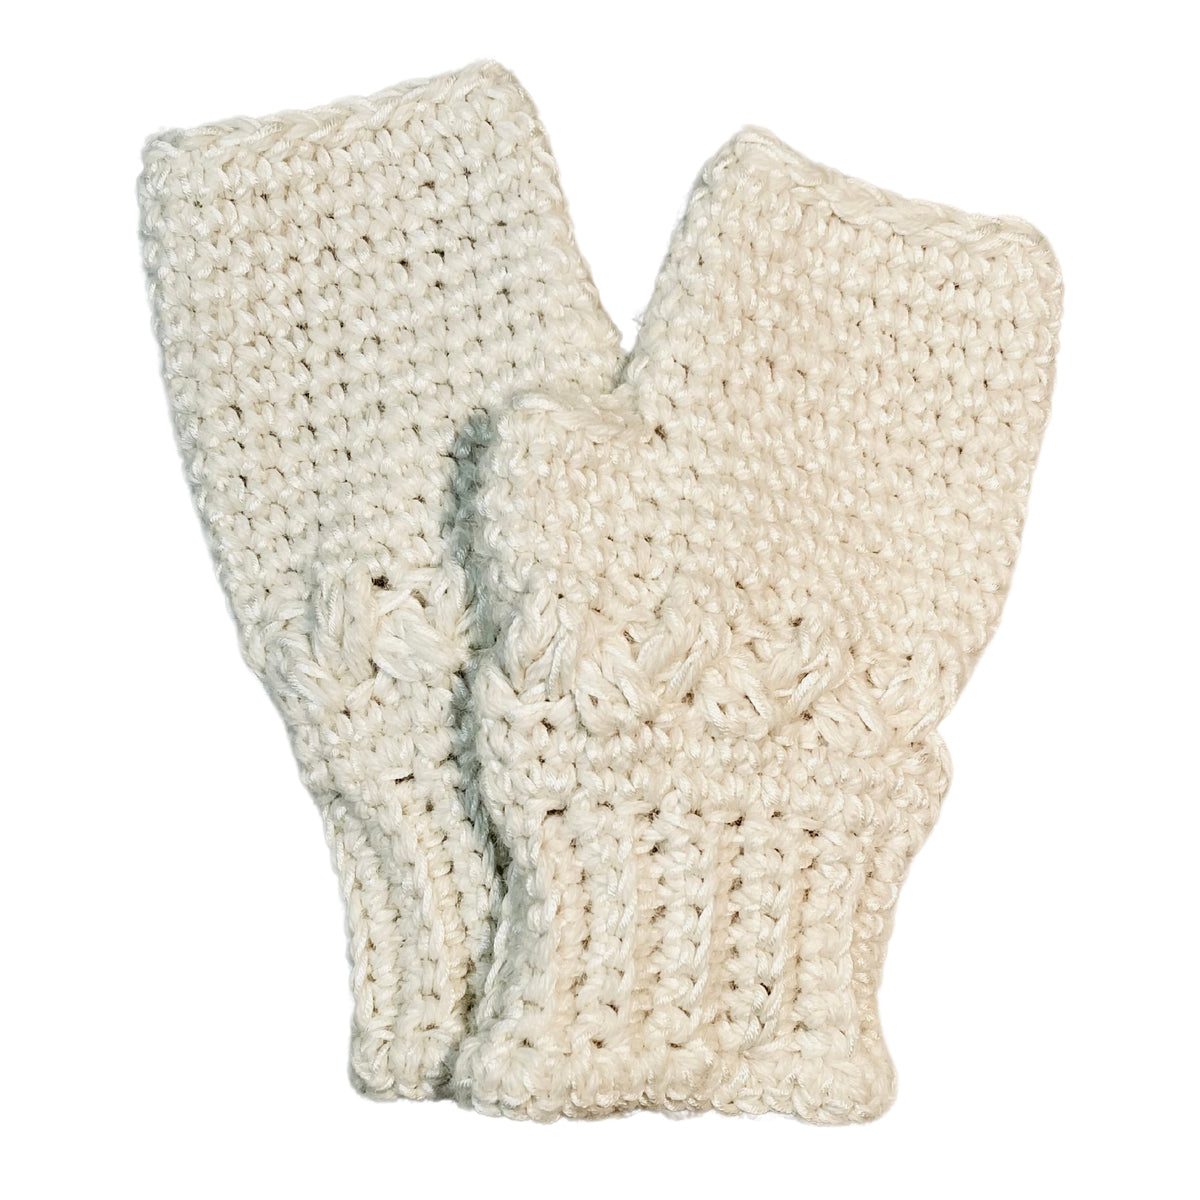 Alpacas of Montana natural white colored cozy soft warm handmade knitted crochet fingerless celtic wristie mittens made in Montana out of alpaca yarn and bamboo yarn.